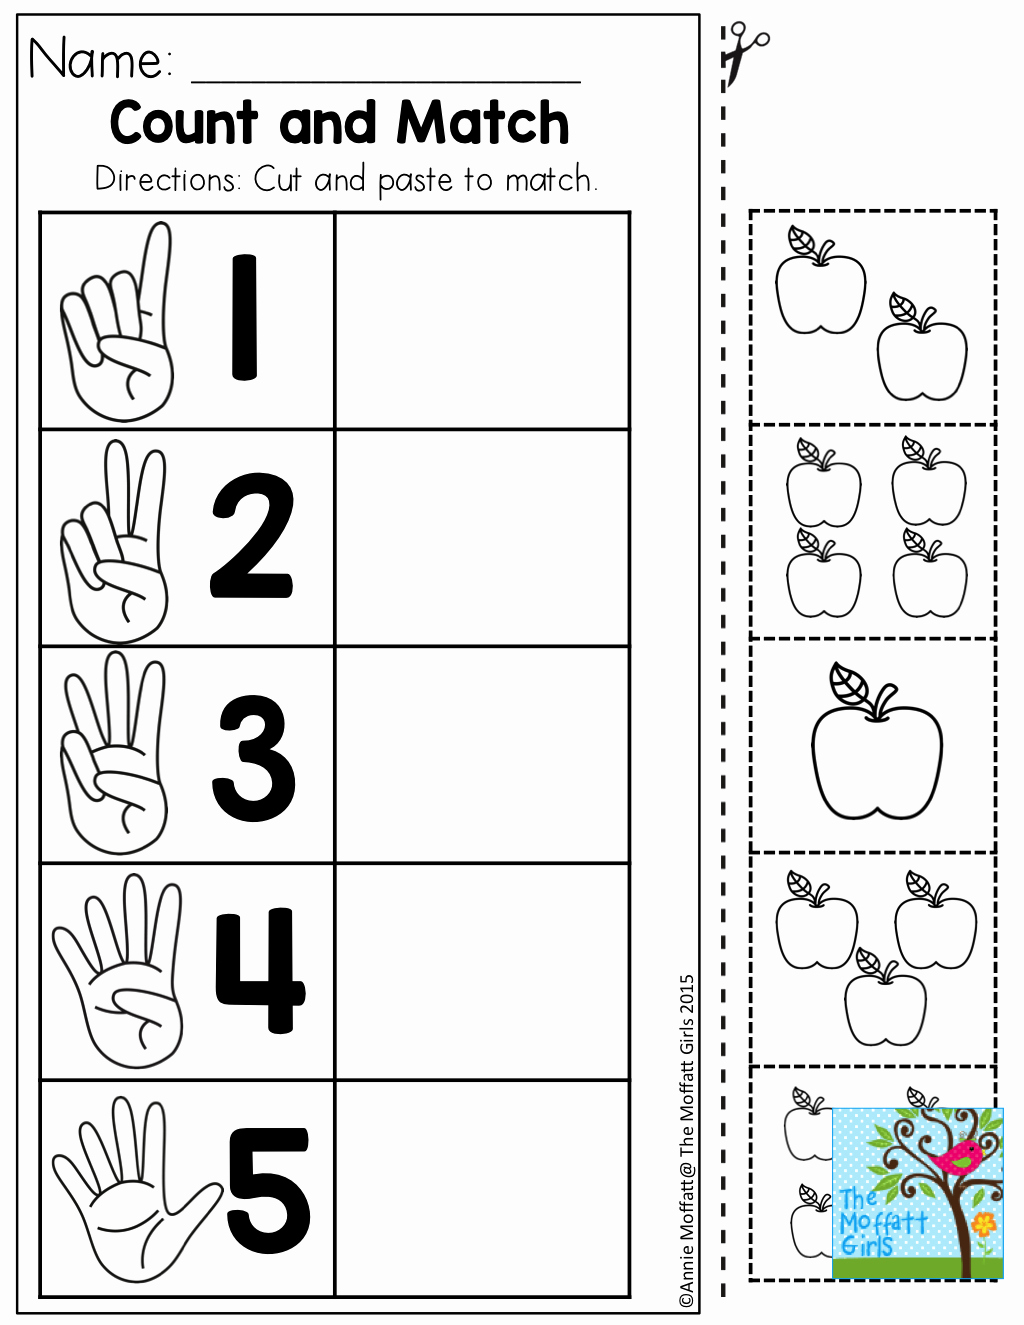 Cut and Paste Worksheets Free Best Of Letter Matching Worksheets Cut and Paste